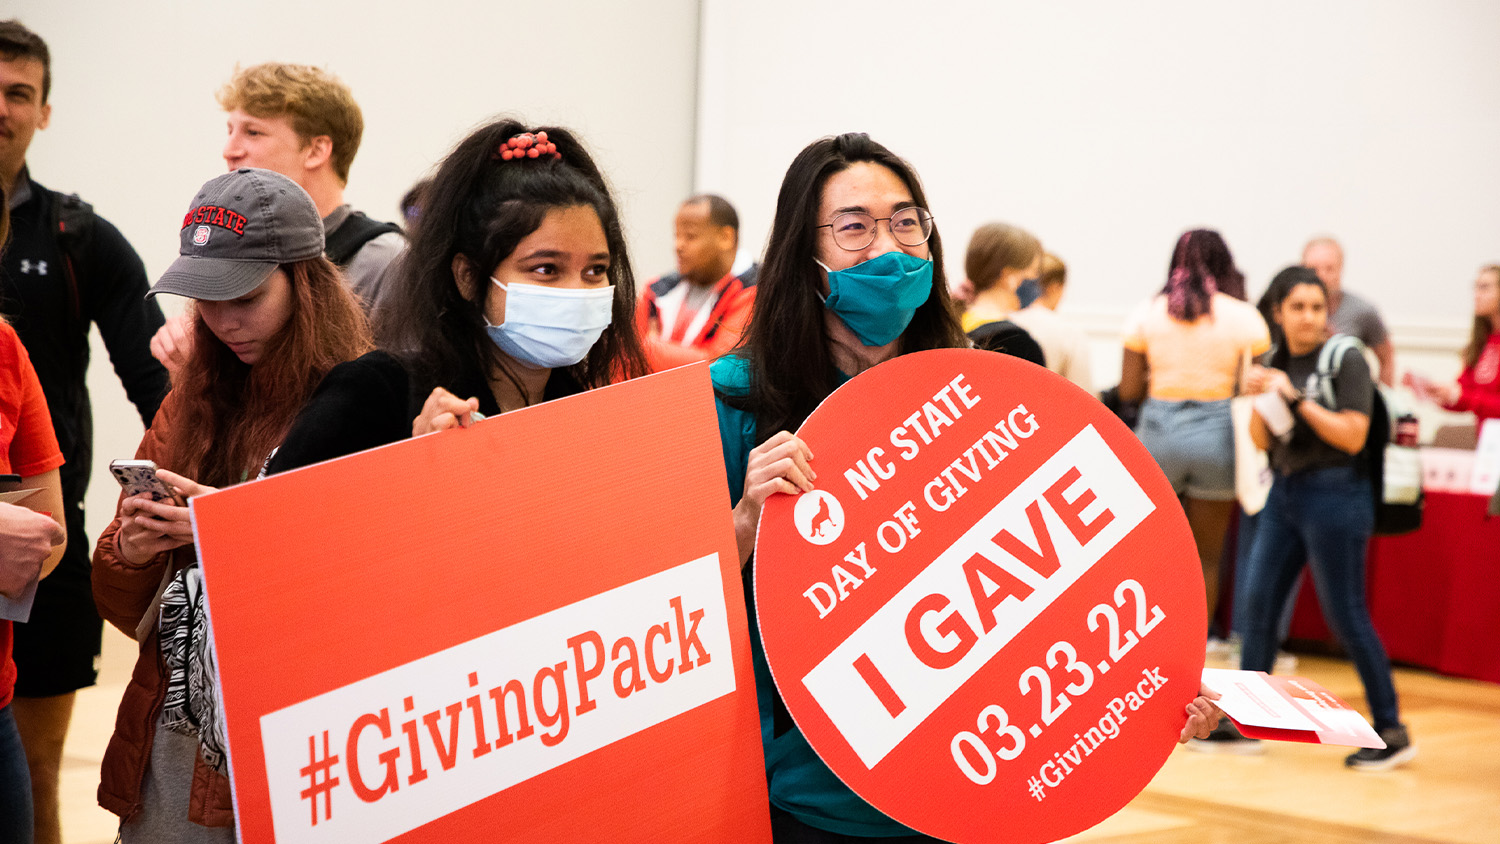 Two students hold signs for #GivingPack